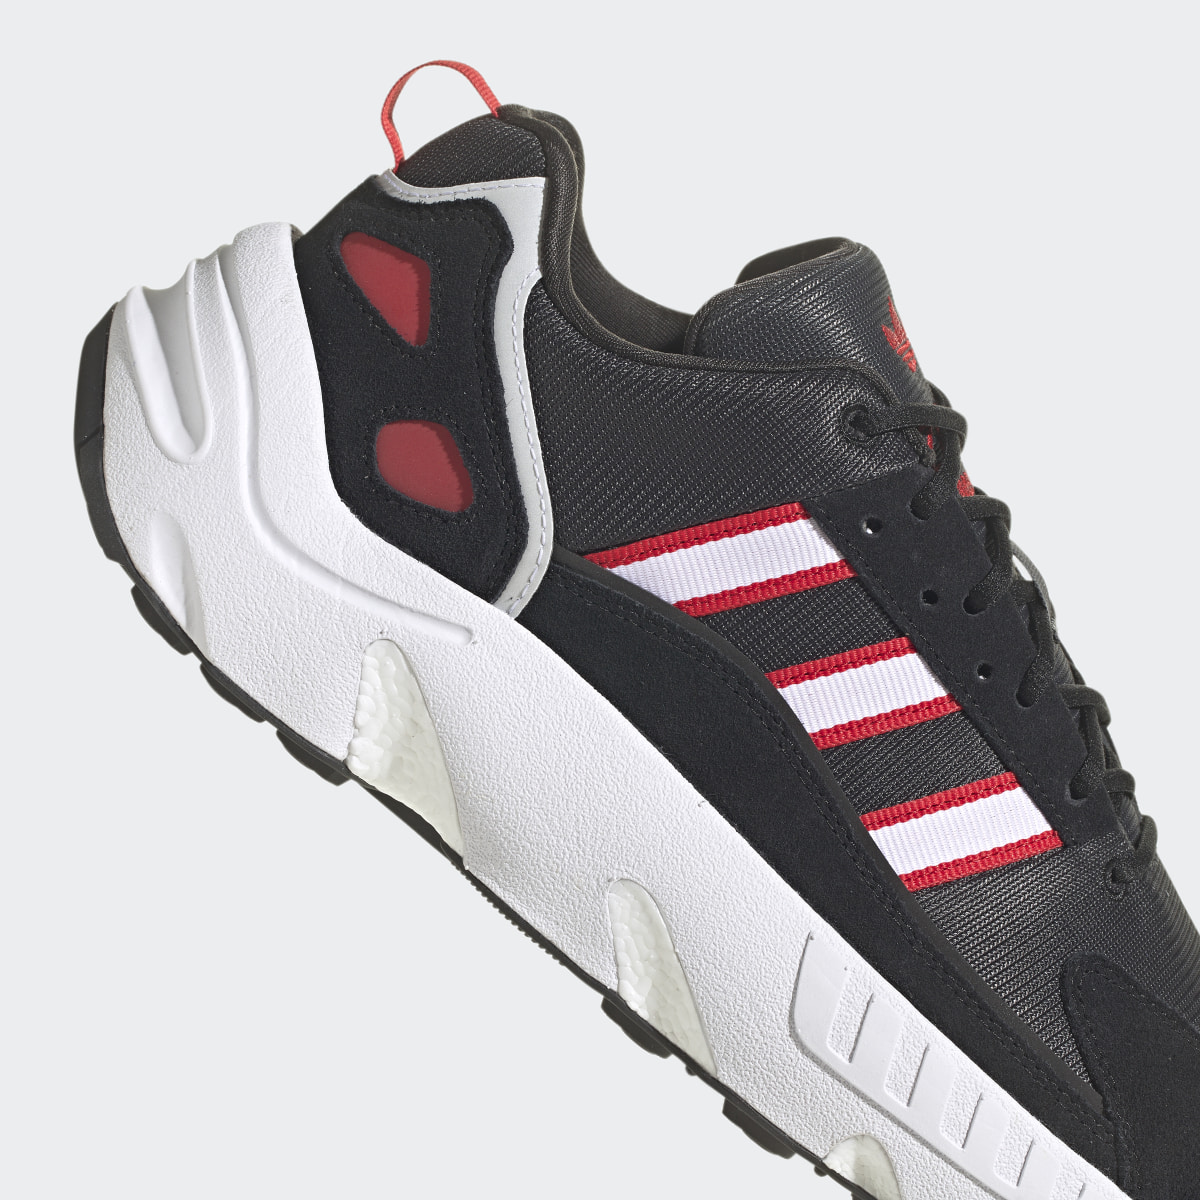 Adidas ZX 22 BOOST Shoes. 10